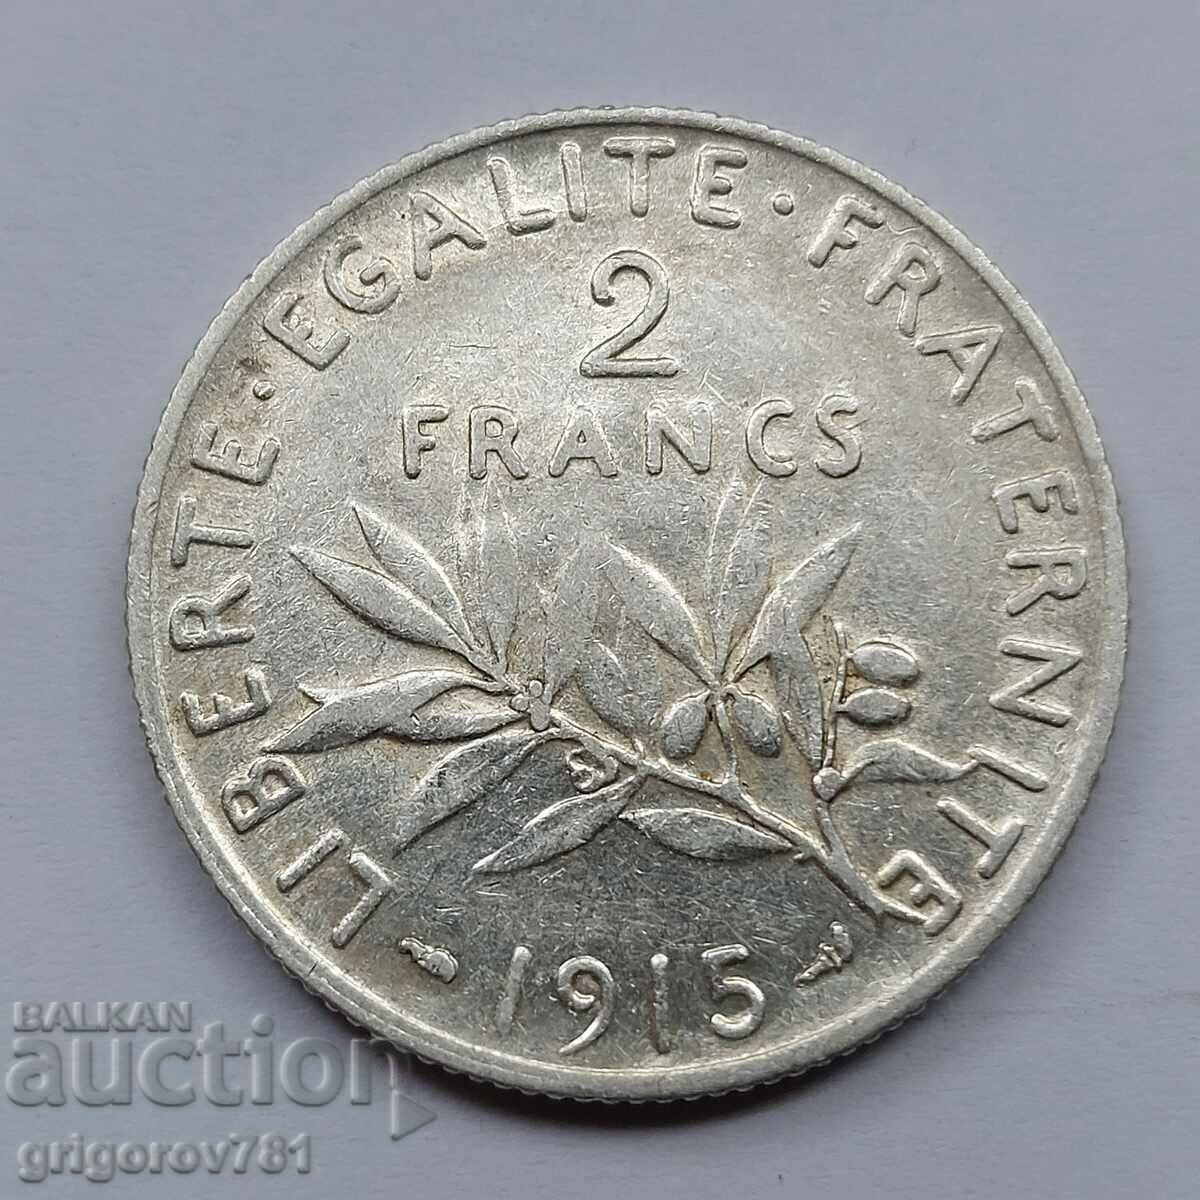 2 Francs Silver France 1915 - Silver Coin #123